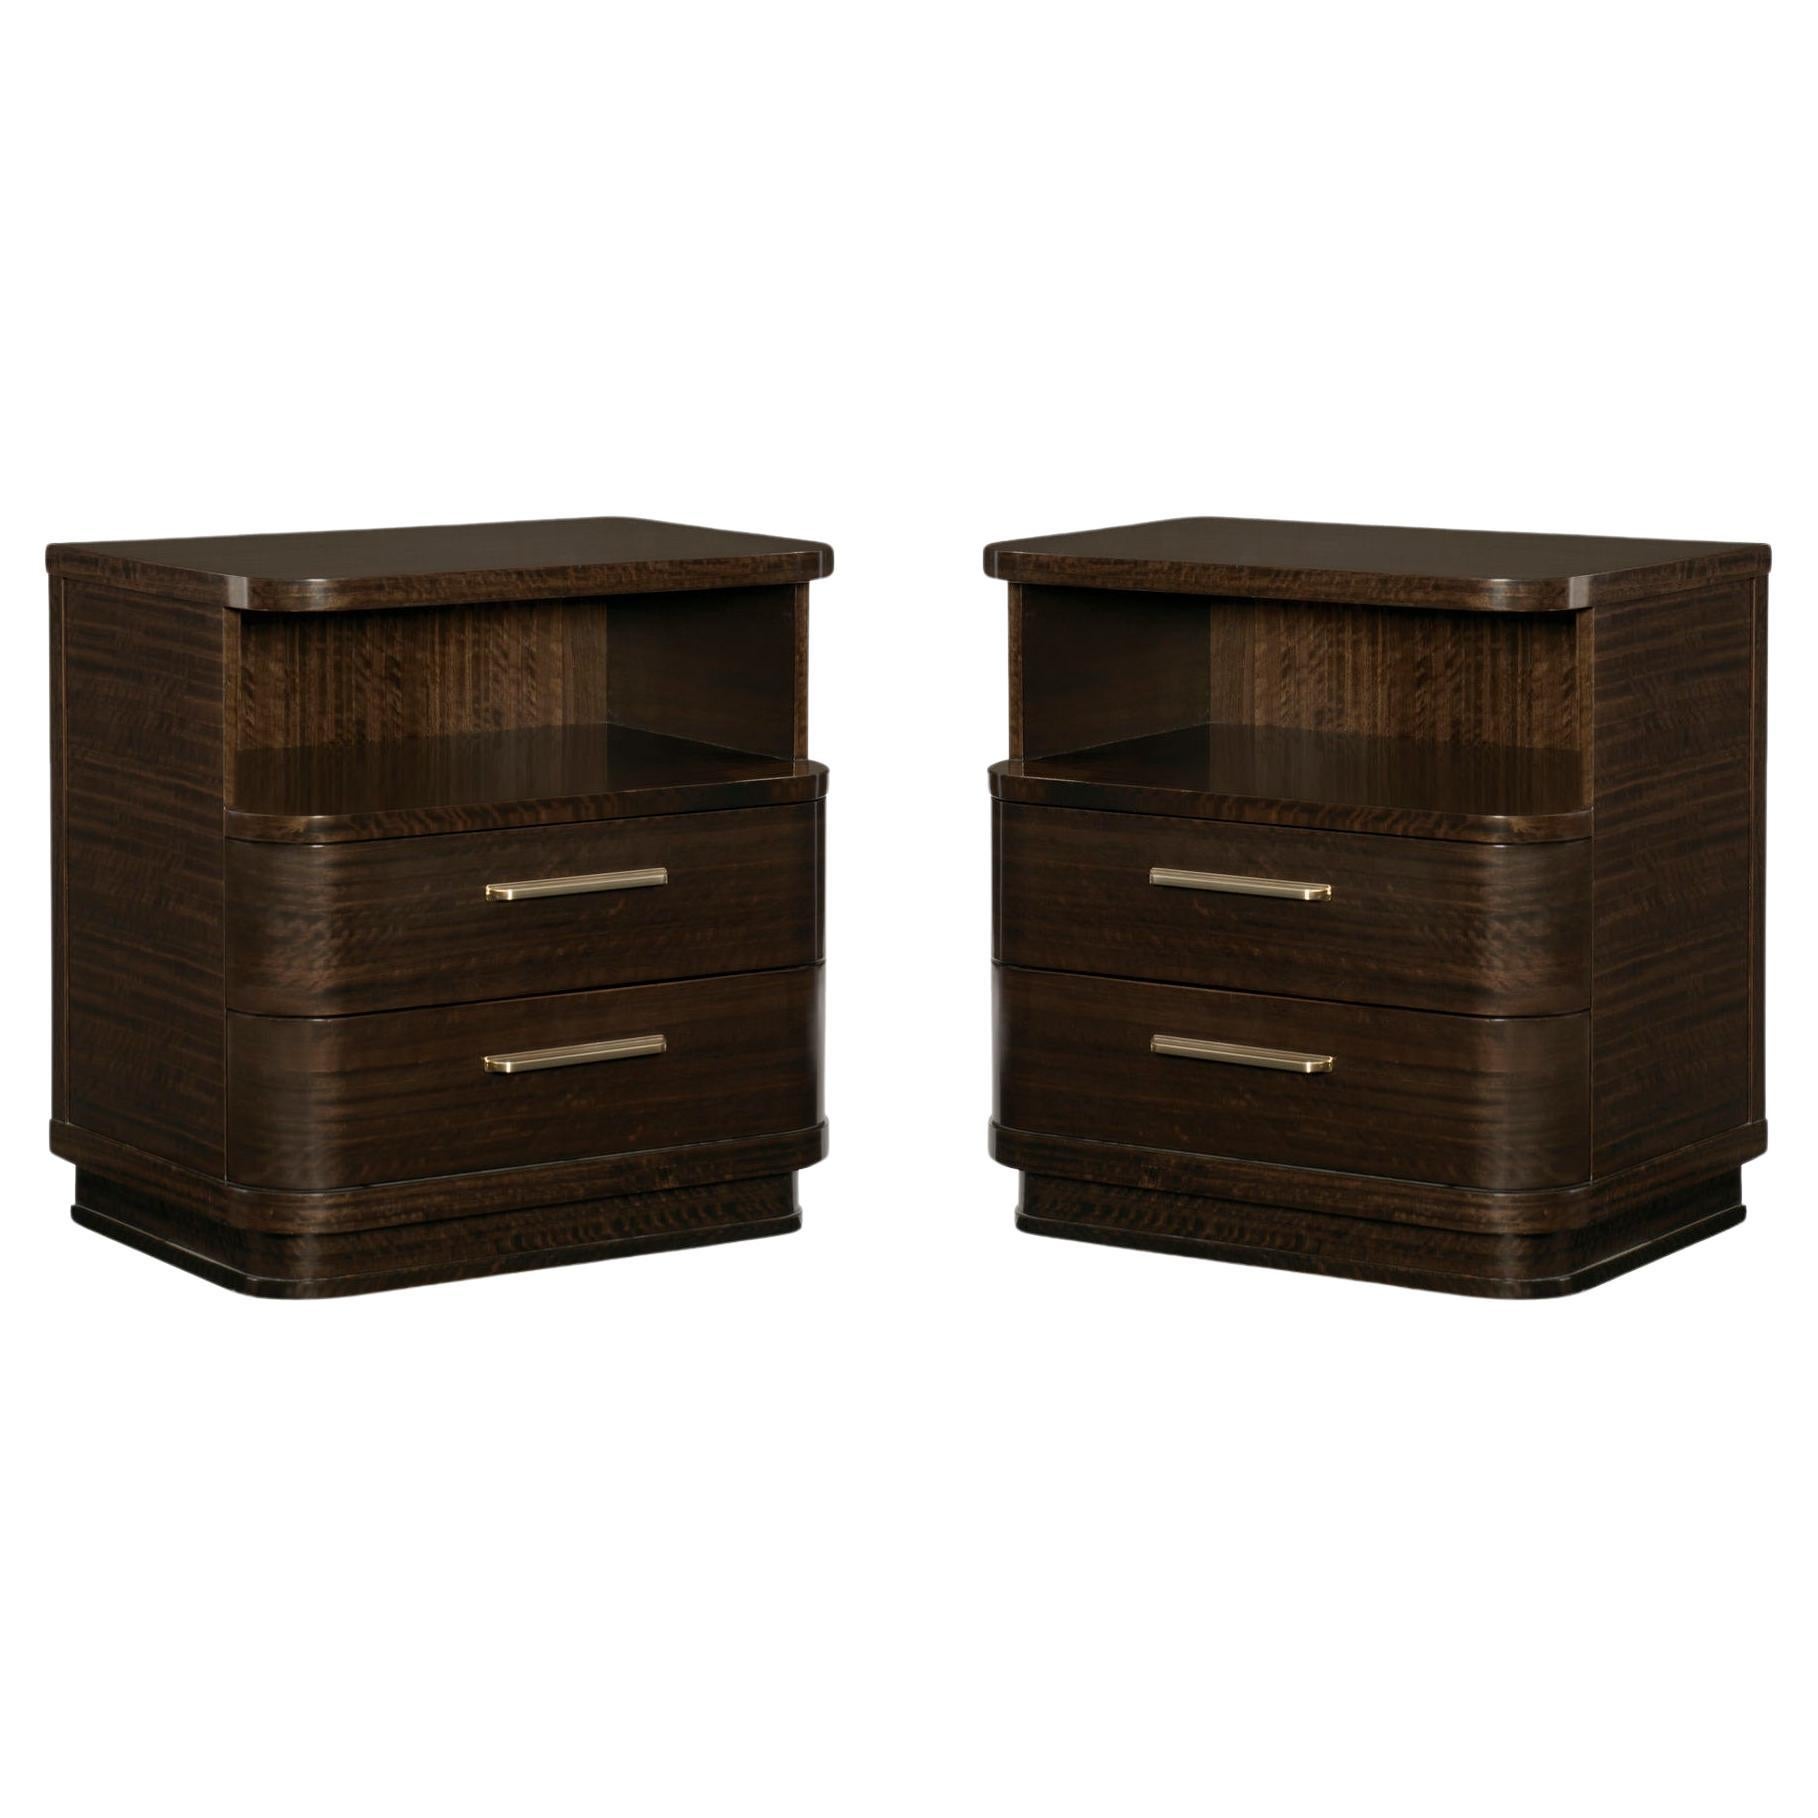 Pair of Bourbon Art Deco Style Nightstands For Sale